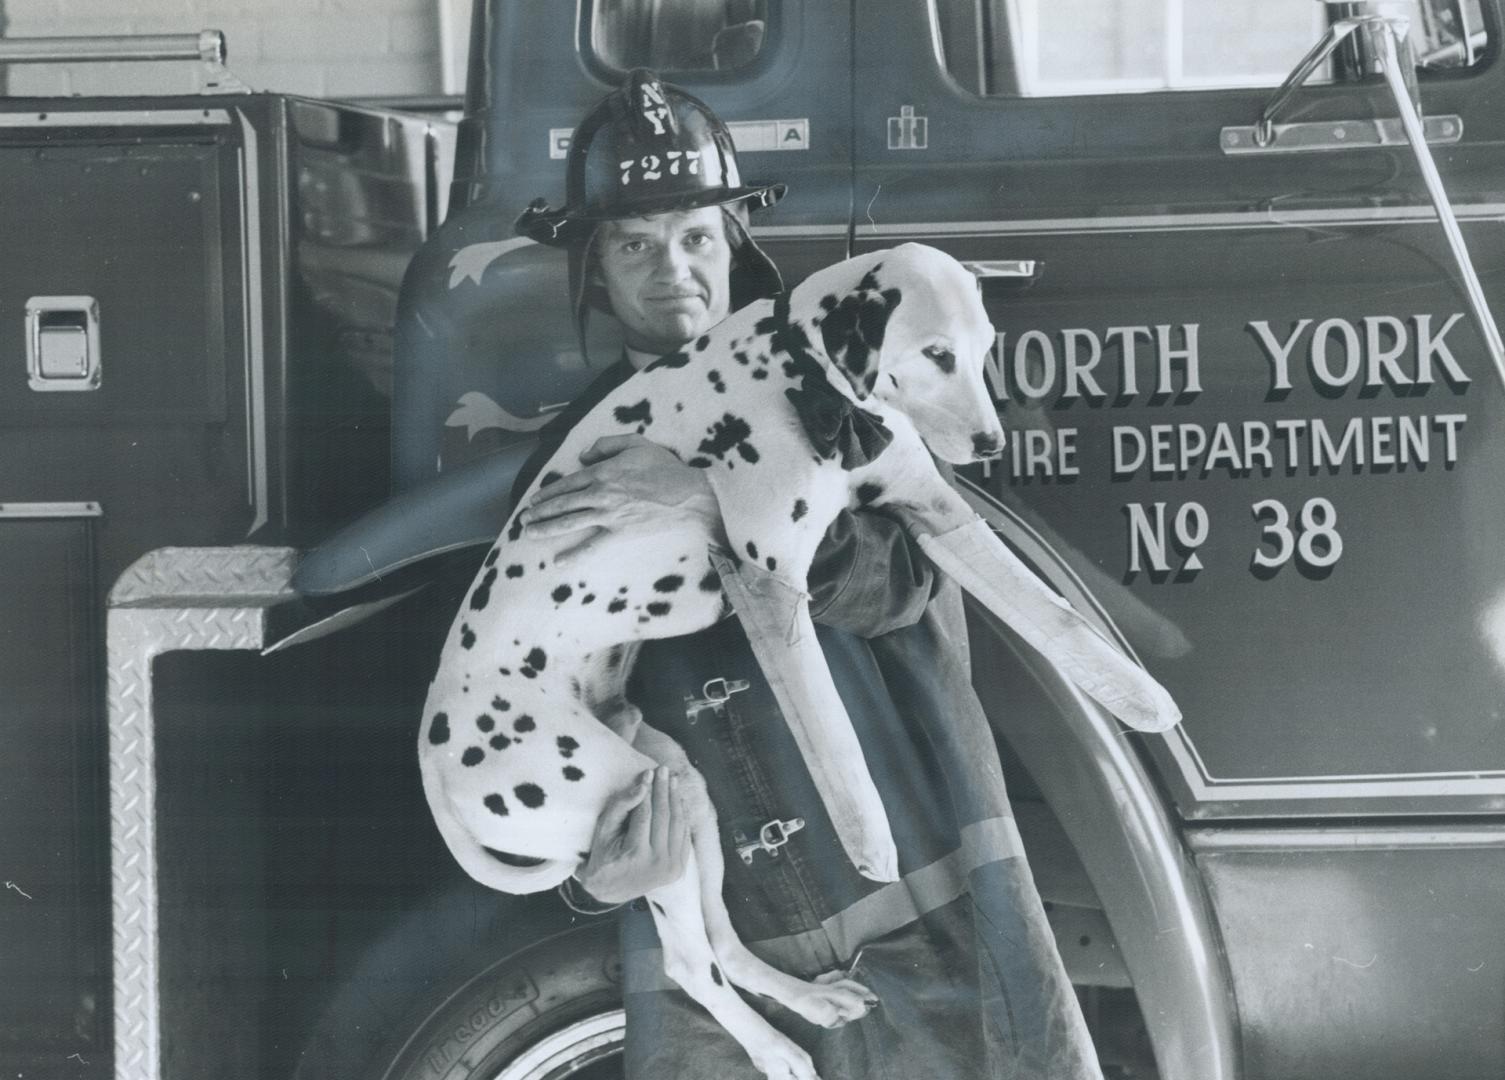 Sebastian's on the mend, Sebastian, the 5-year-old Dalmatian that doubles as a mascot for the North York Fire Department, broke his two front paws rec(...)